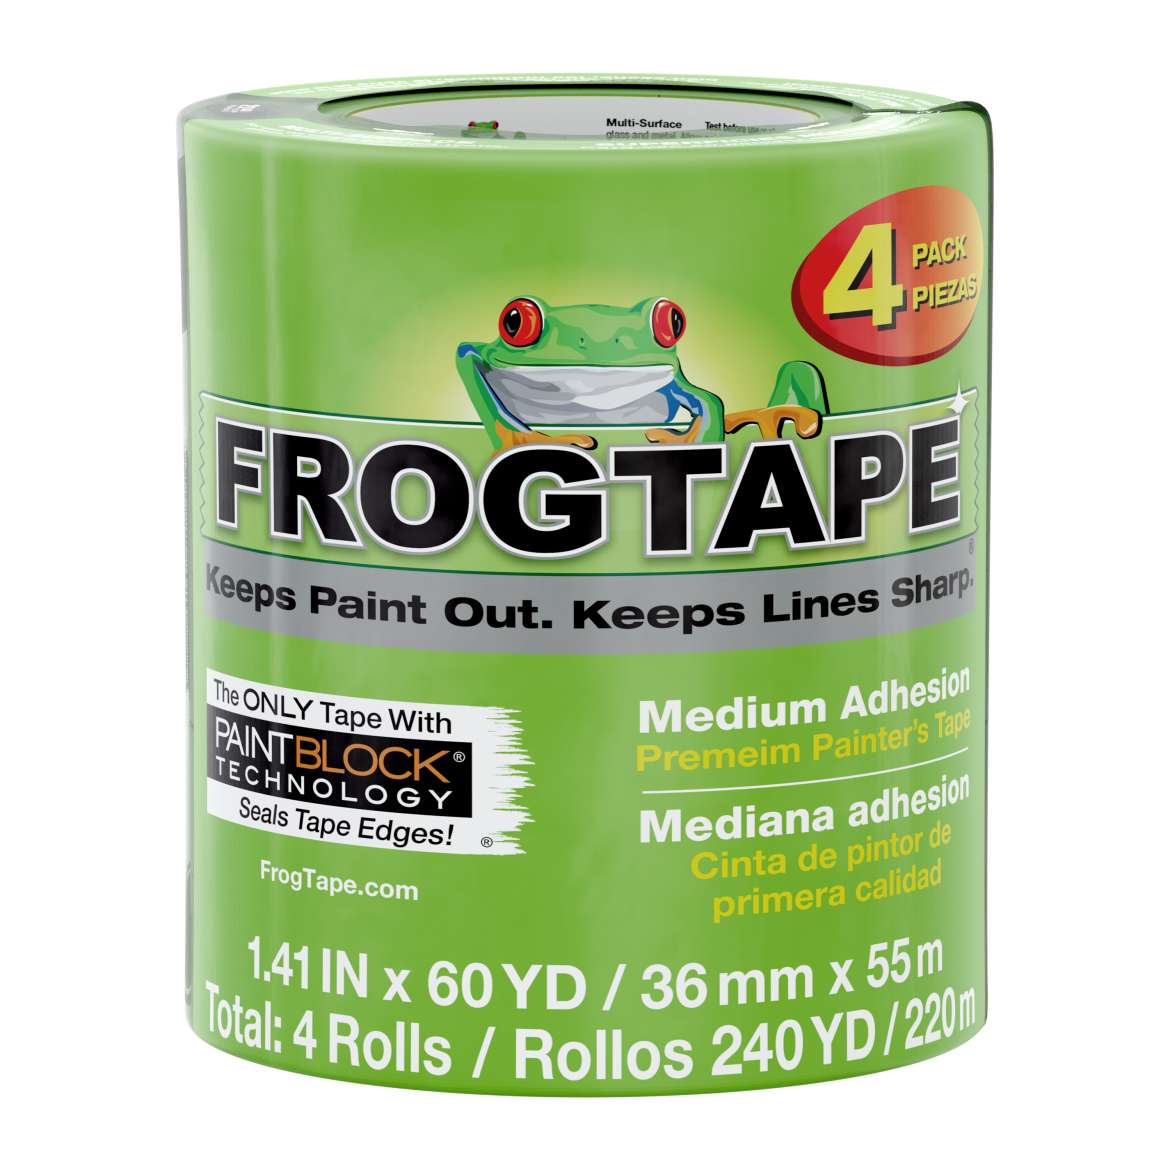 FrogTape® Multi-Surface Painter's Tape - Green, 4 pk, 1.41 in. x 60 yd.